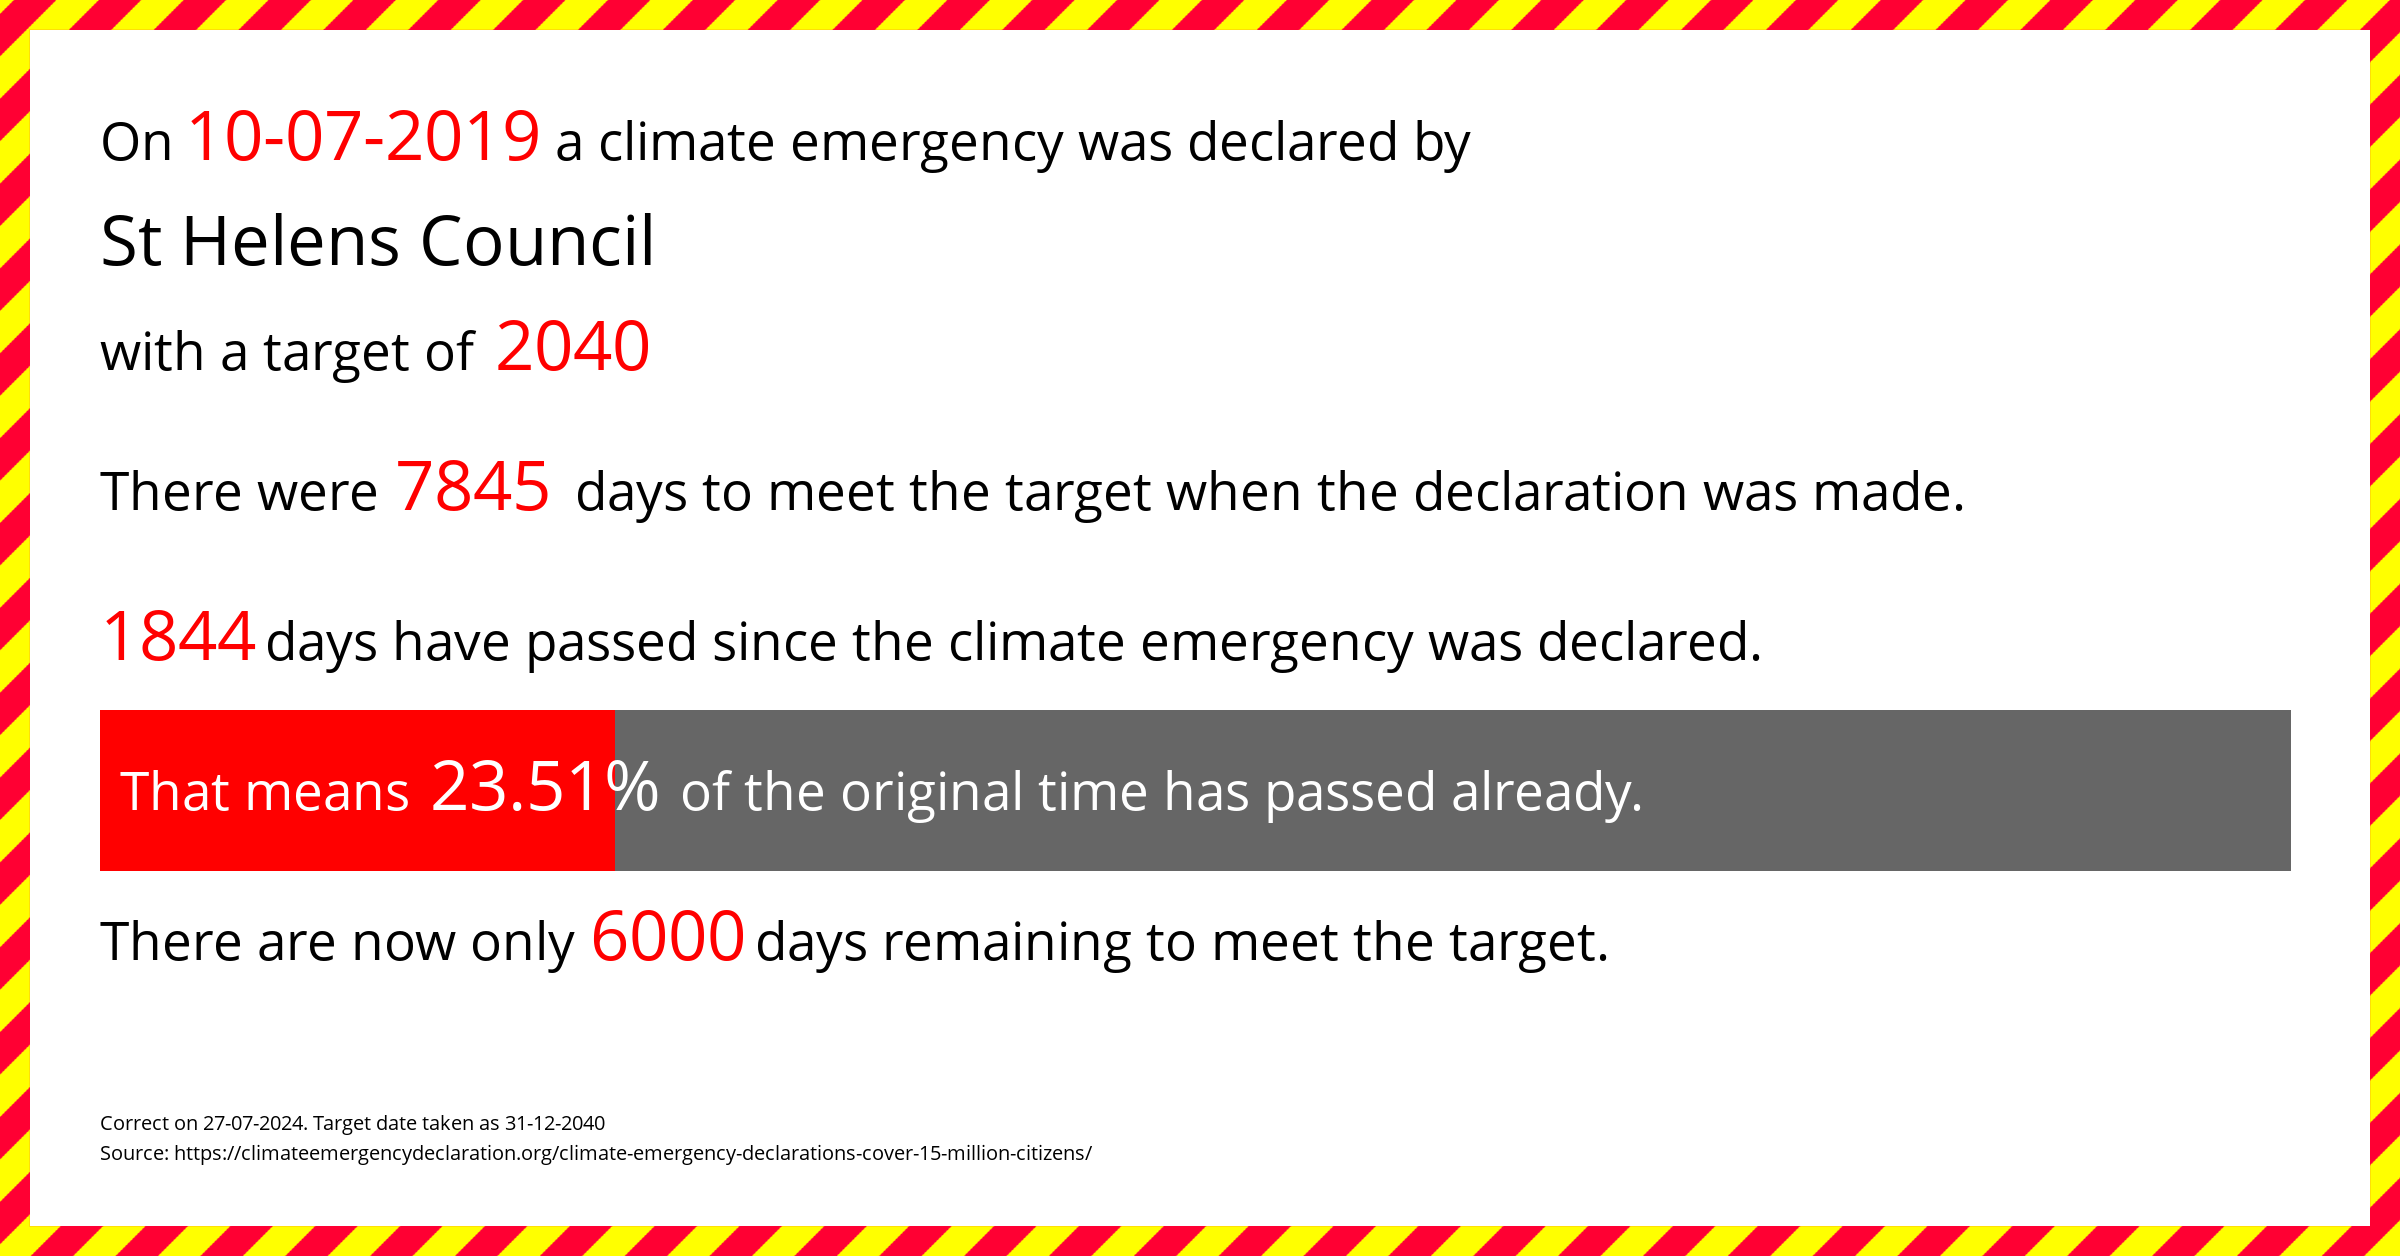 St Helens Council declared a Climate emergency on Wednesday 10th July 2019, with a target of 2040.